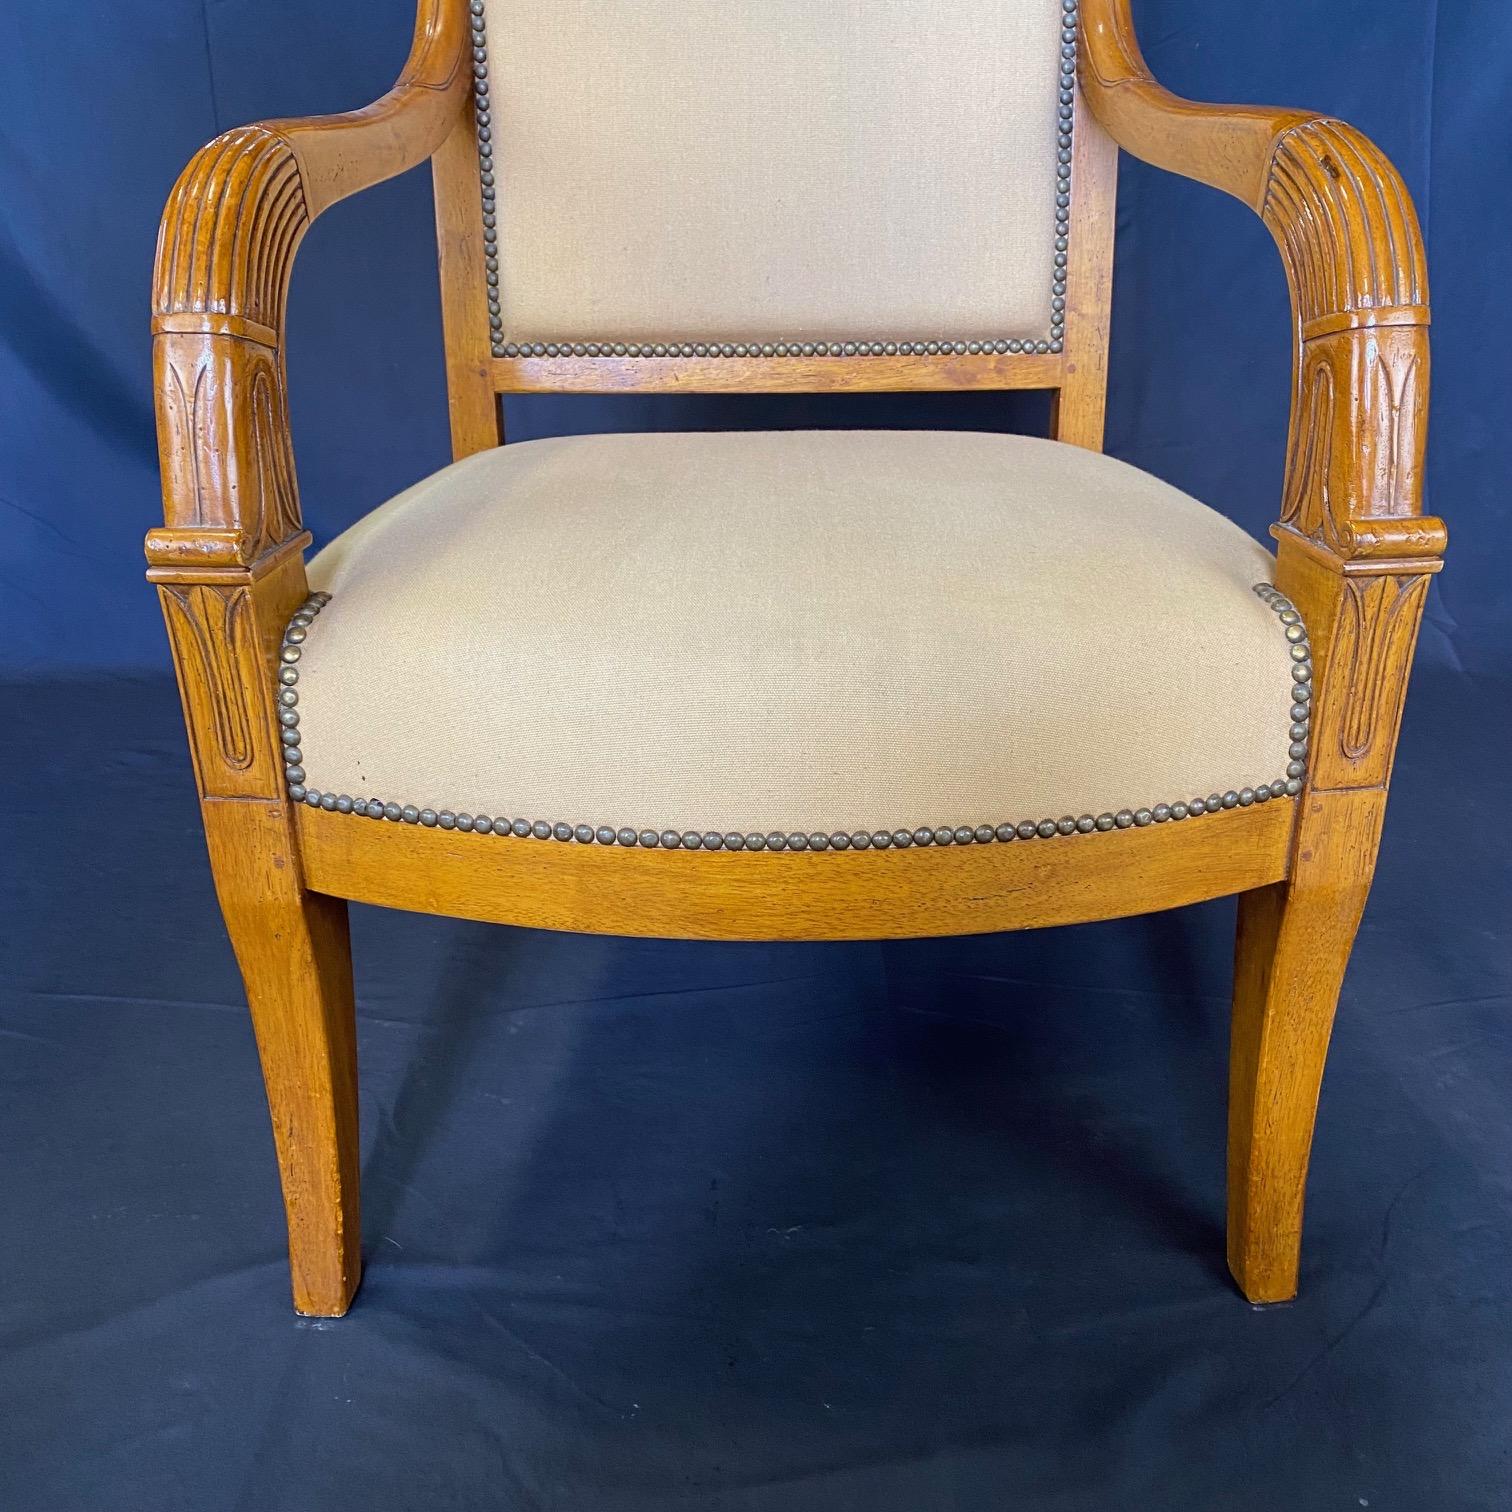  Pair of French Antique Walnut Empire Tulip Fauteuils or Armchairs  In Good Condition For Sale In Hopewell, NJ